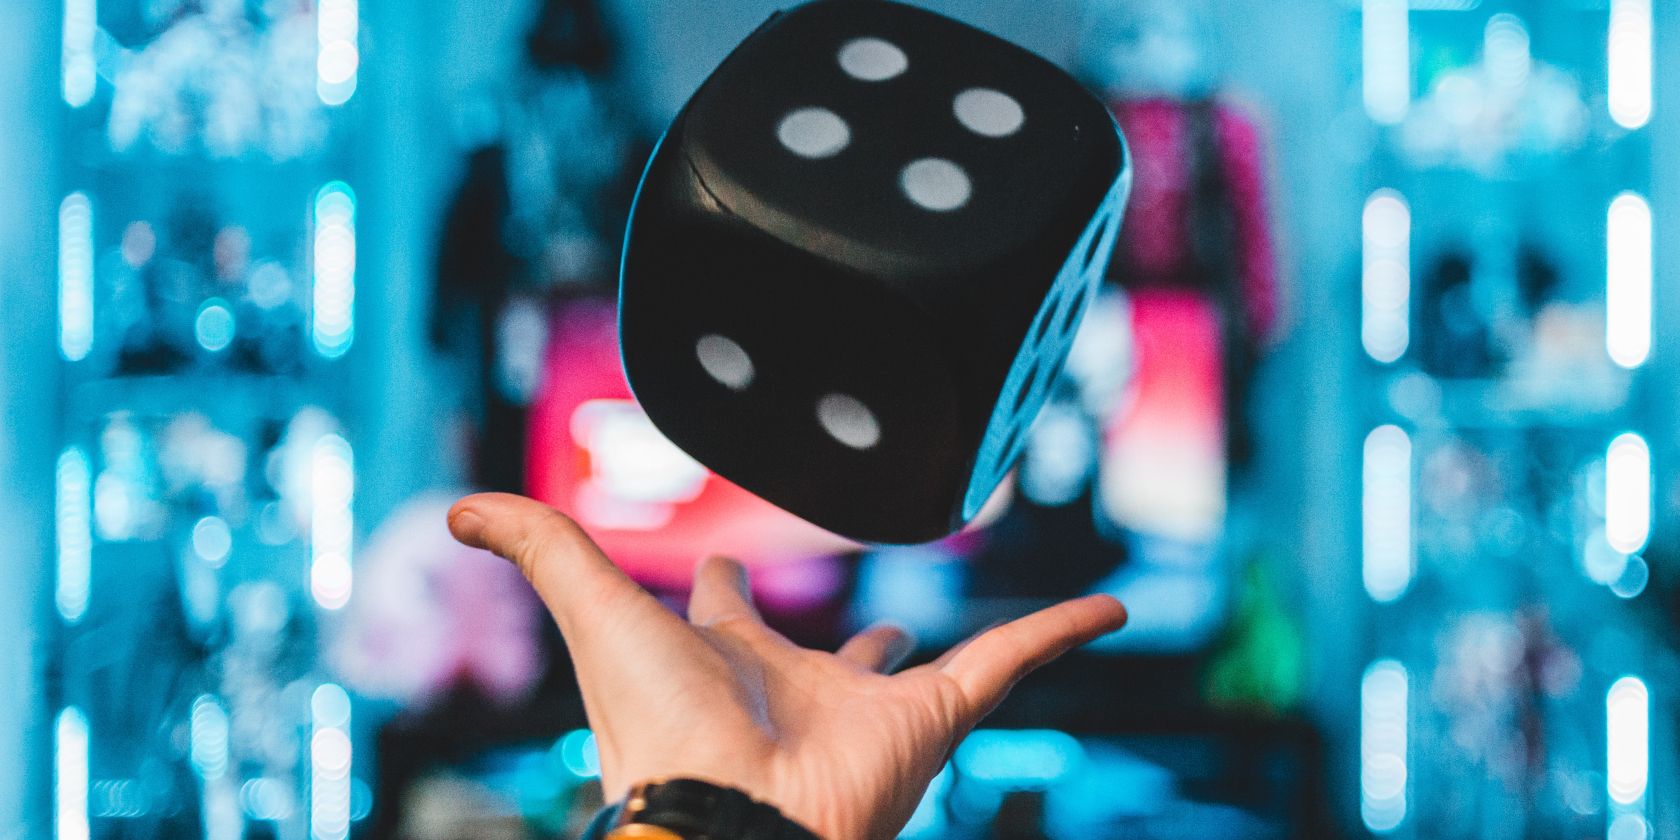 Giant dice floating over a palm